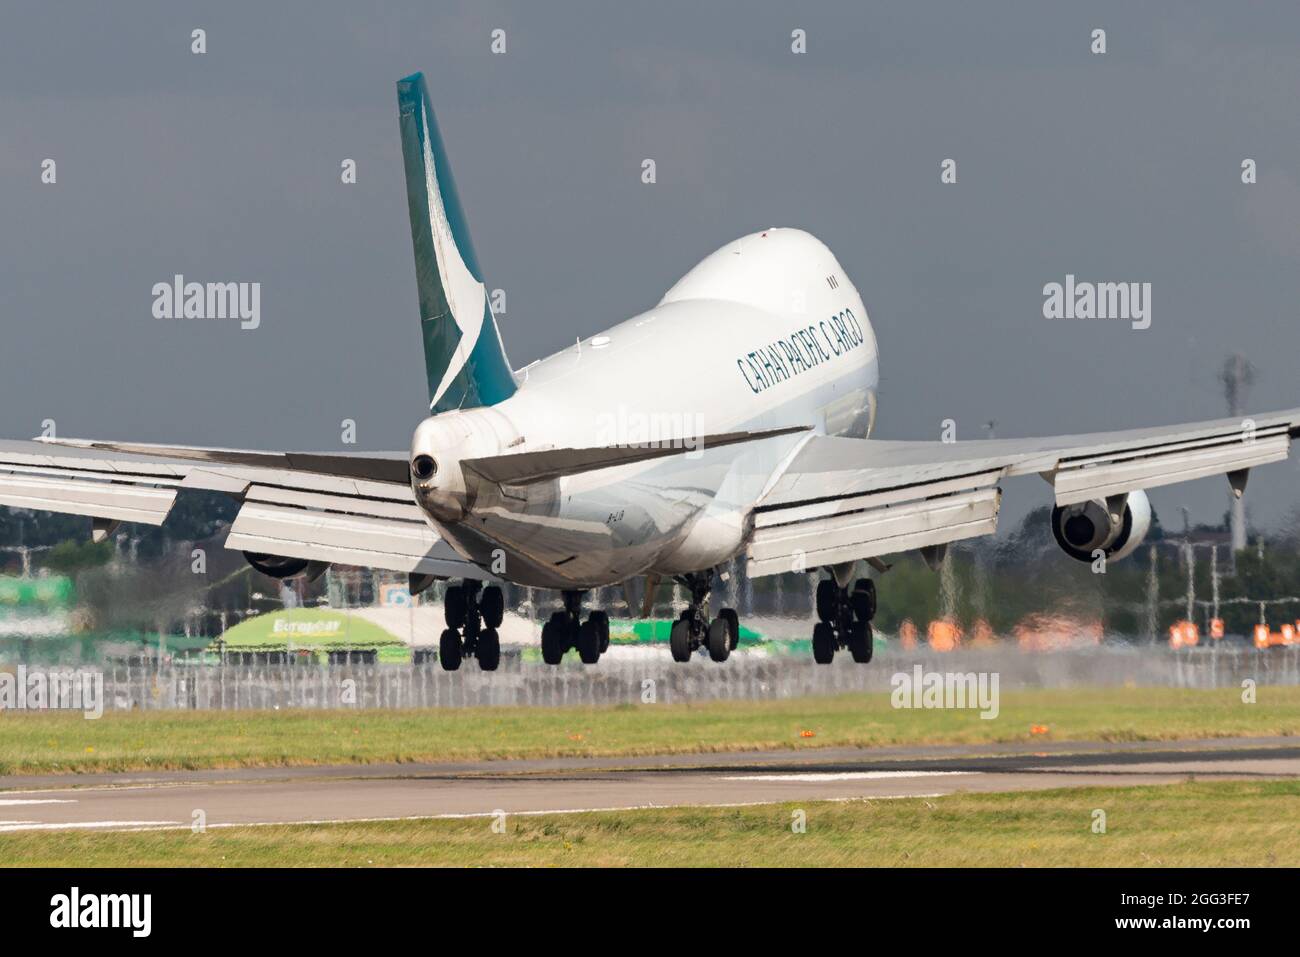 Cathay Pacific Cargo Boeing 747 freighter Jumbo Jet airliner jet plane landing at London Heathrow Airport, UK, about to touch down on runway Stock Photo